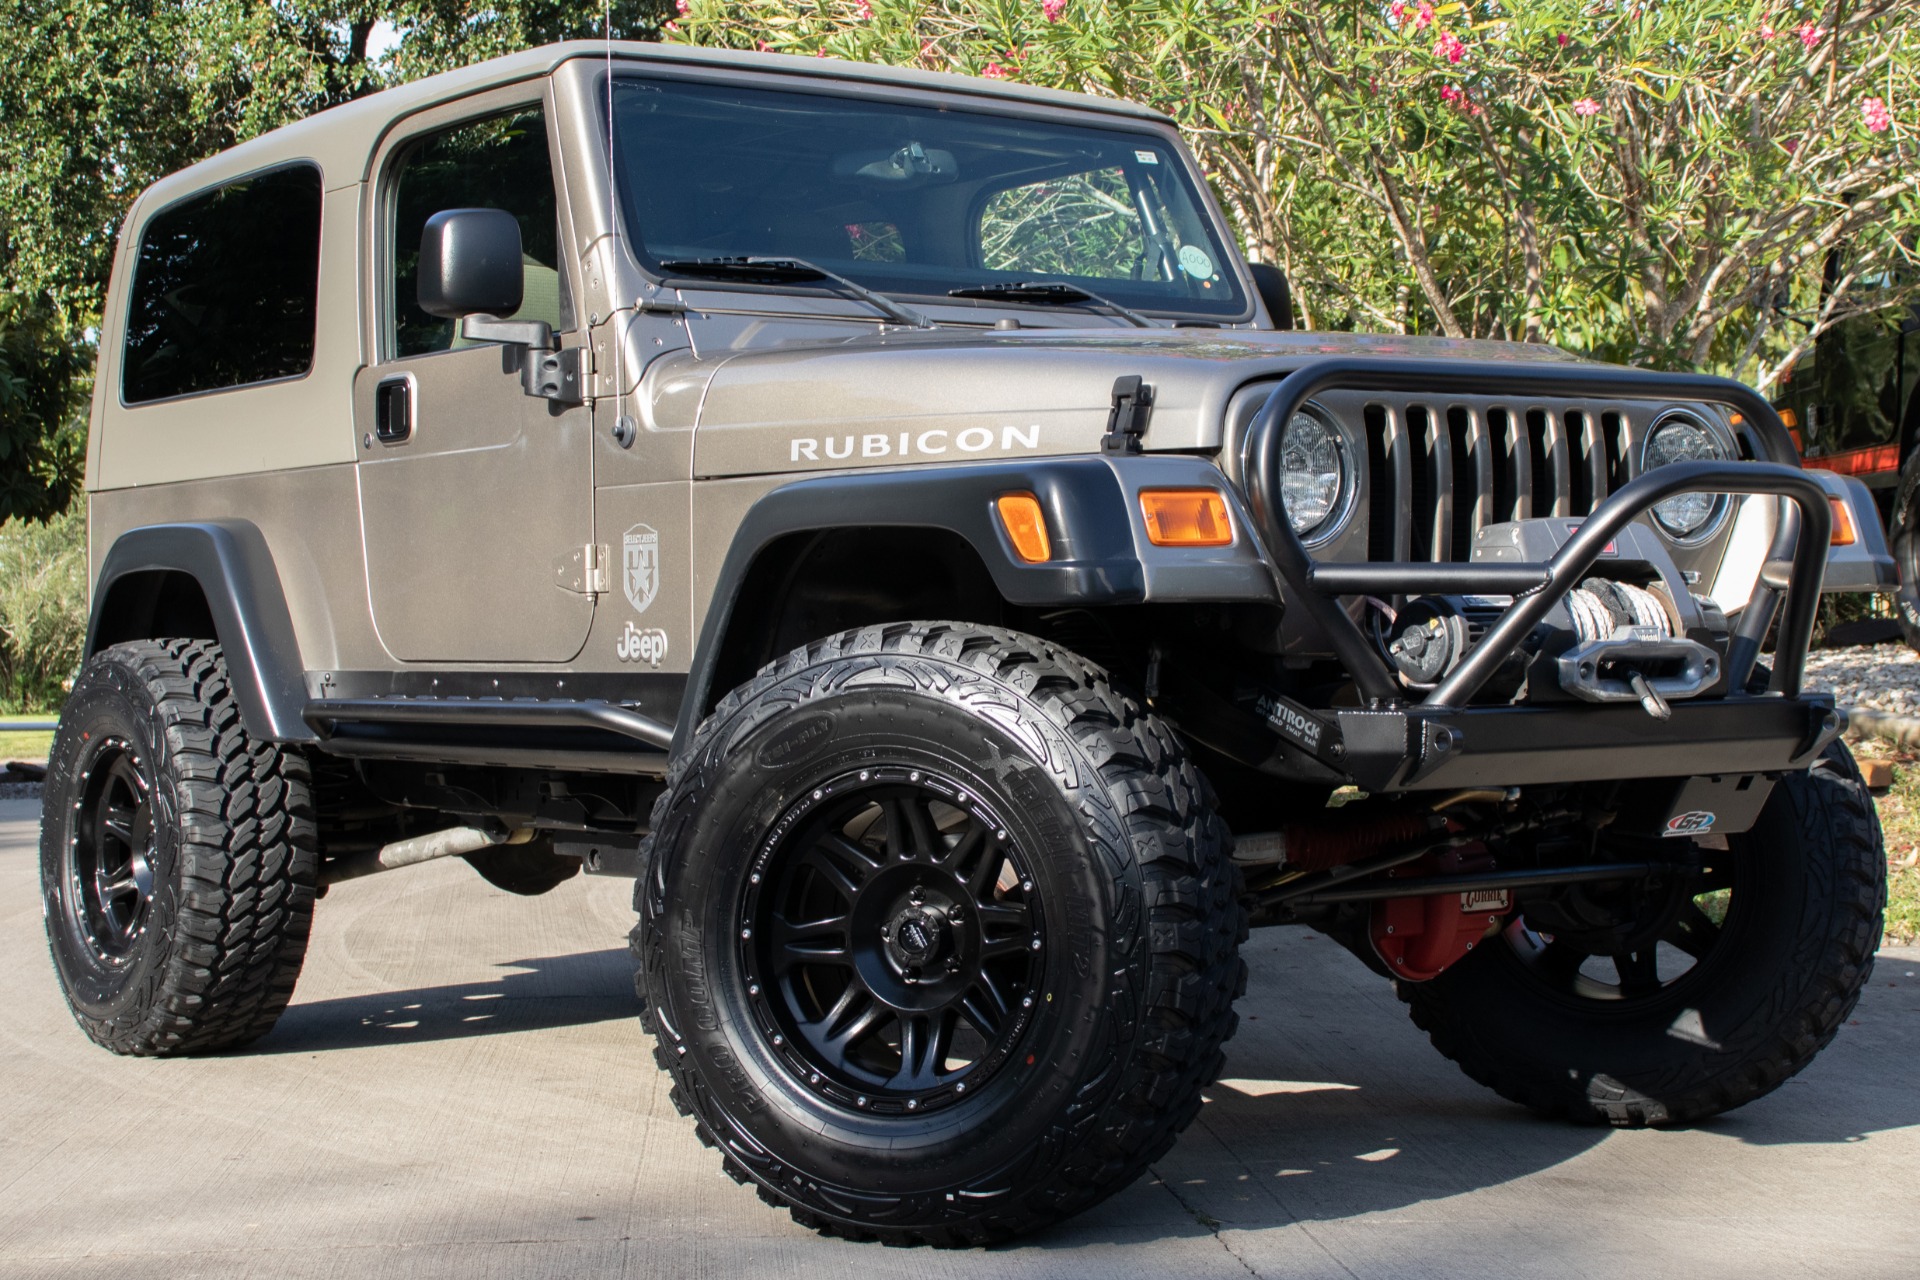 Used 2006 Jeep Wrangler Unlimited Rubicon For Sale (Special Pricing) |  Select Jeeps Inc. Stock #780000